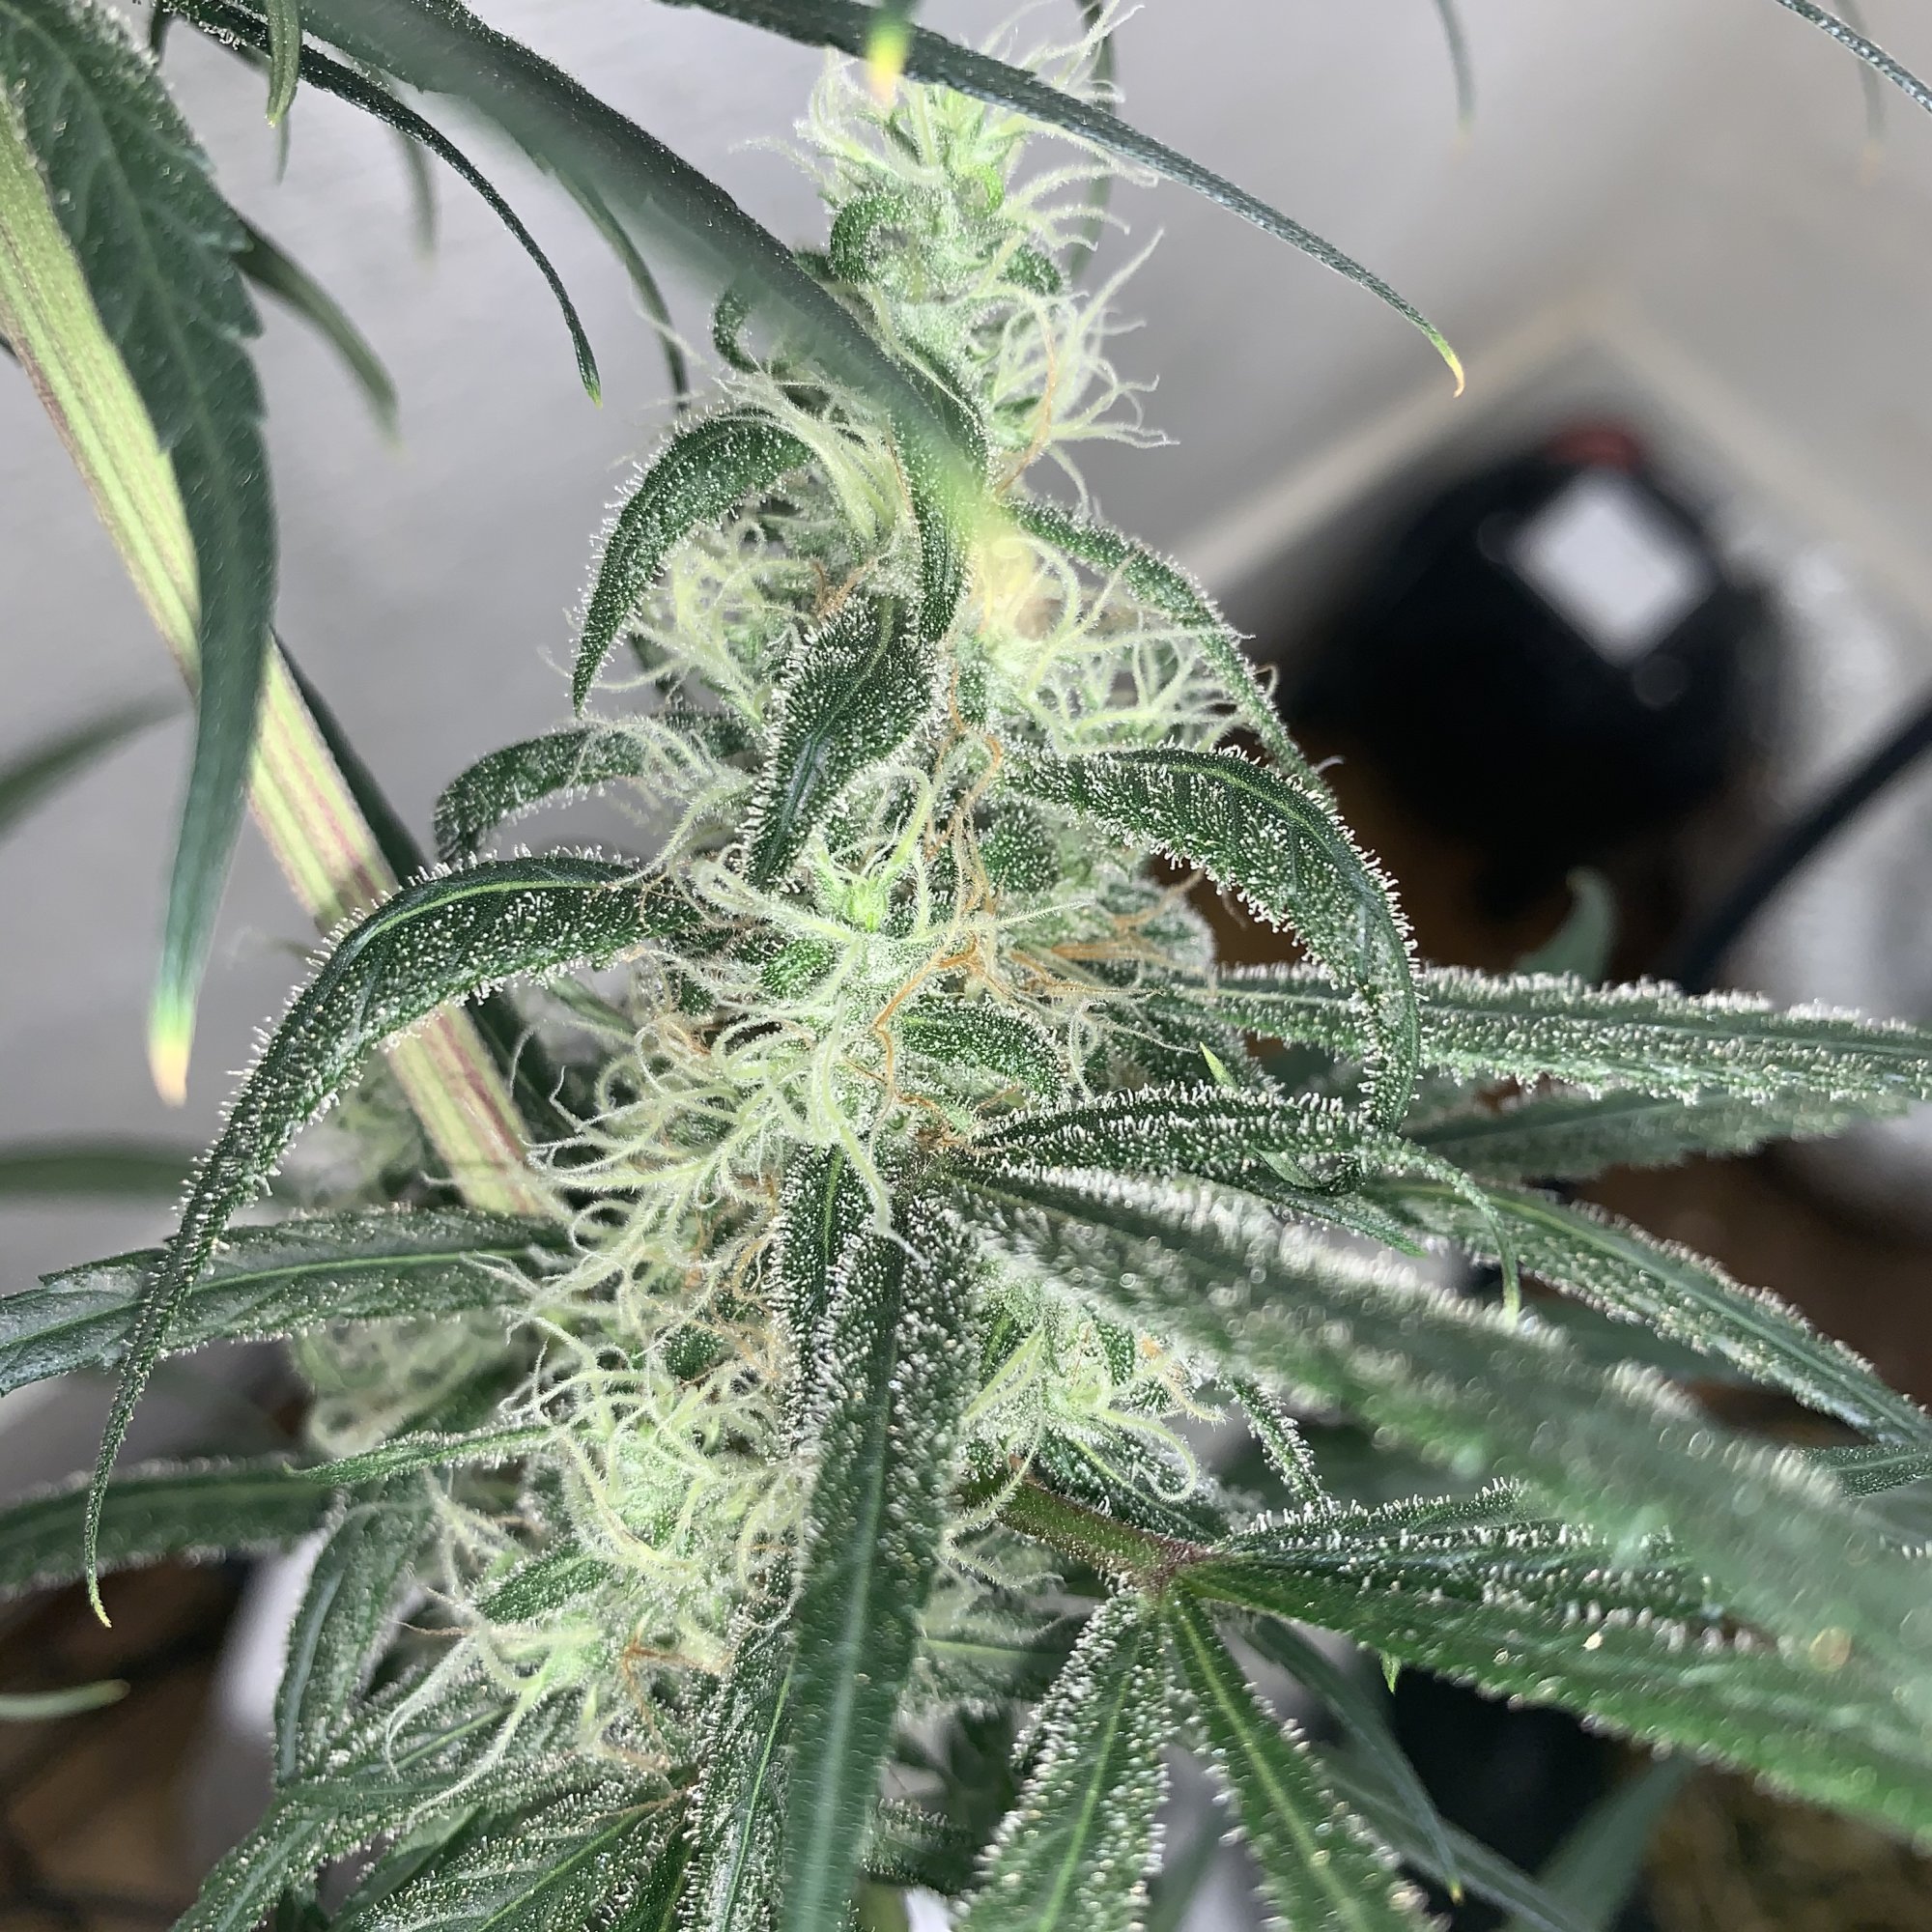 Still too early to harvest 1st time grower 2